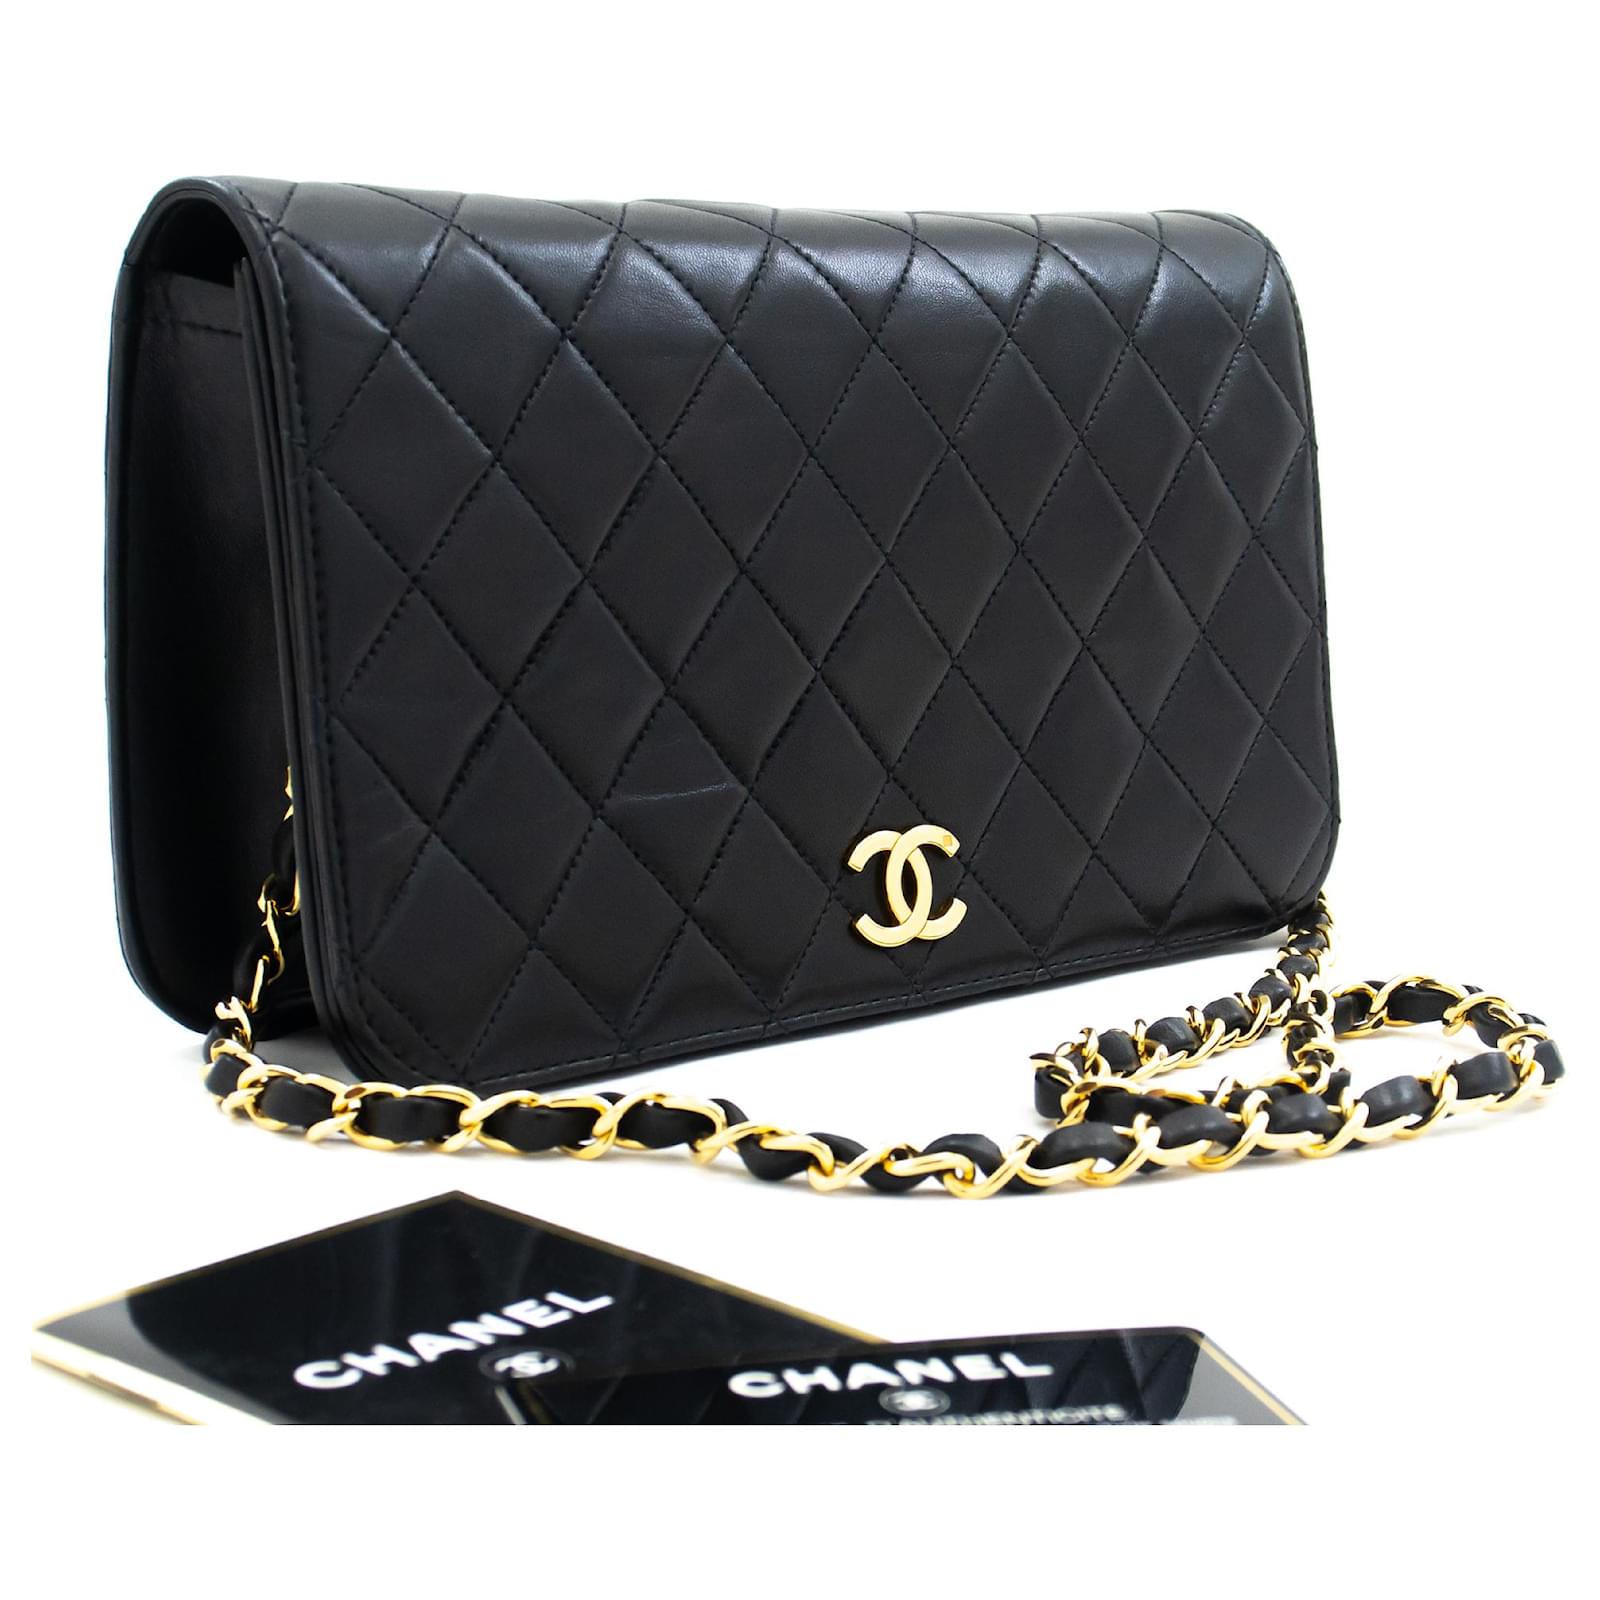 Handbags Chanel Chanel Full Flap Chain Shoulder Bag Clutch Black Quilted Lambskin